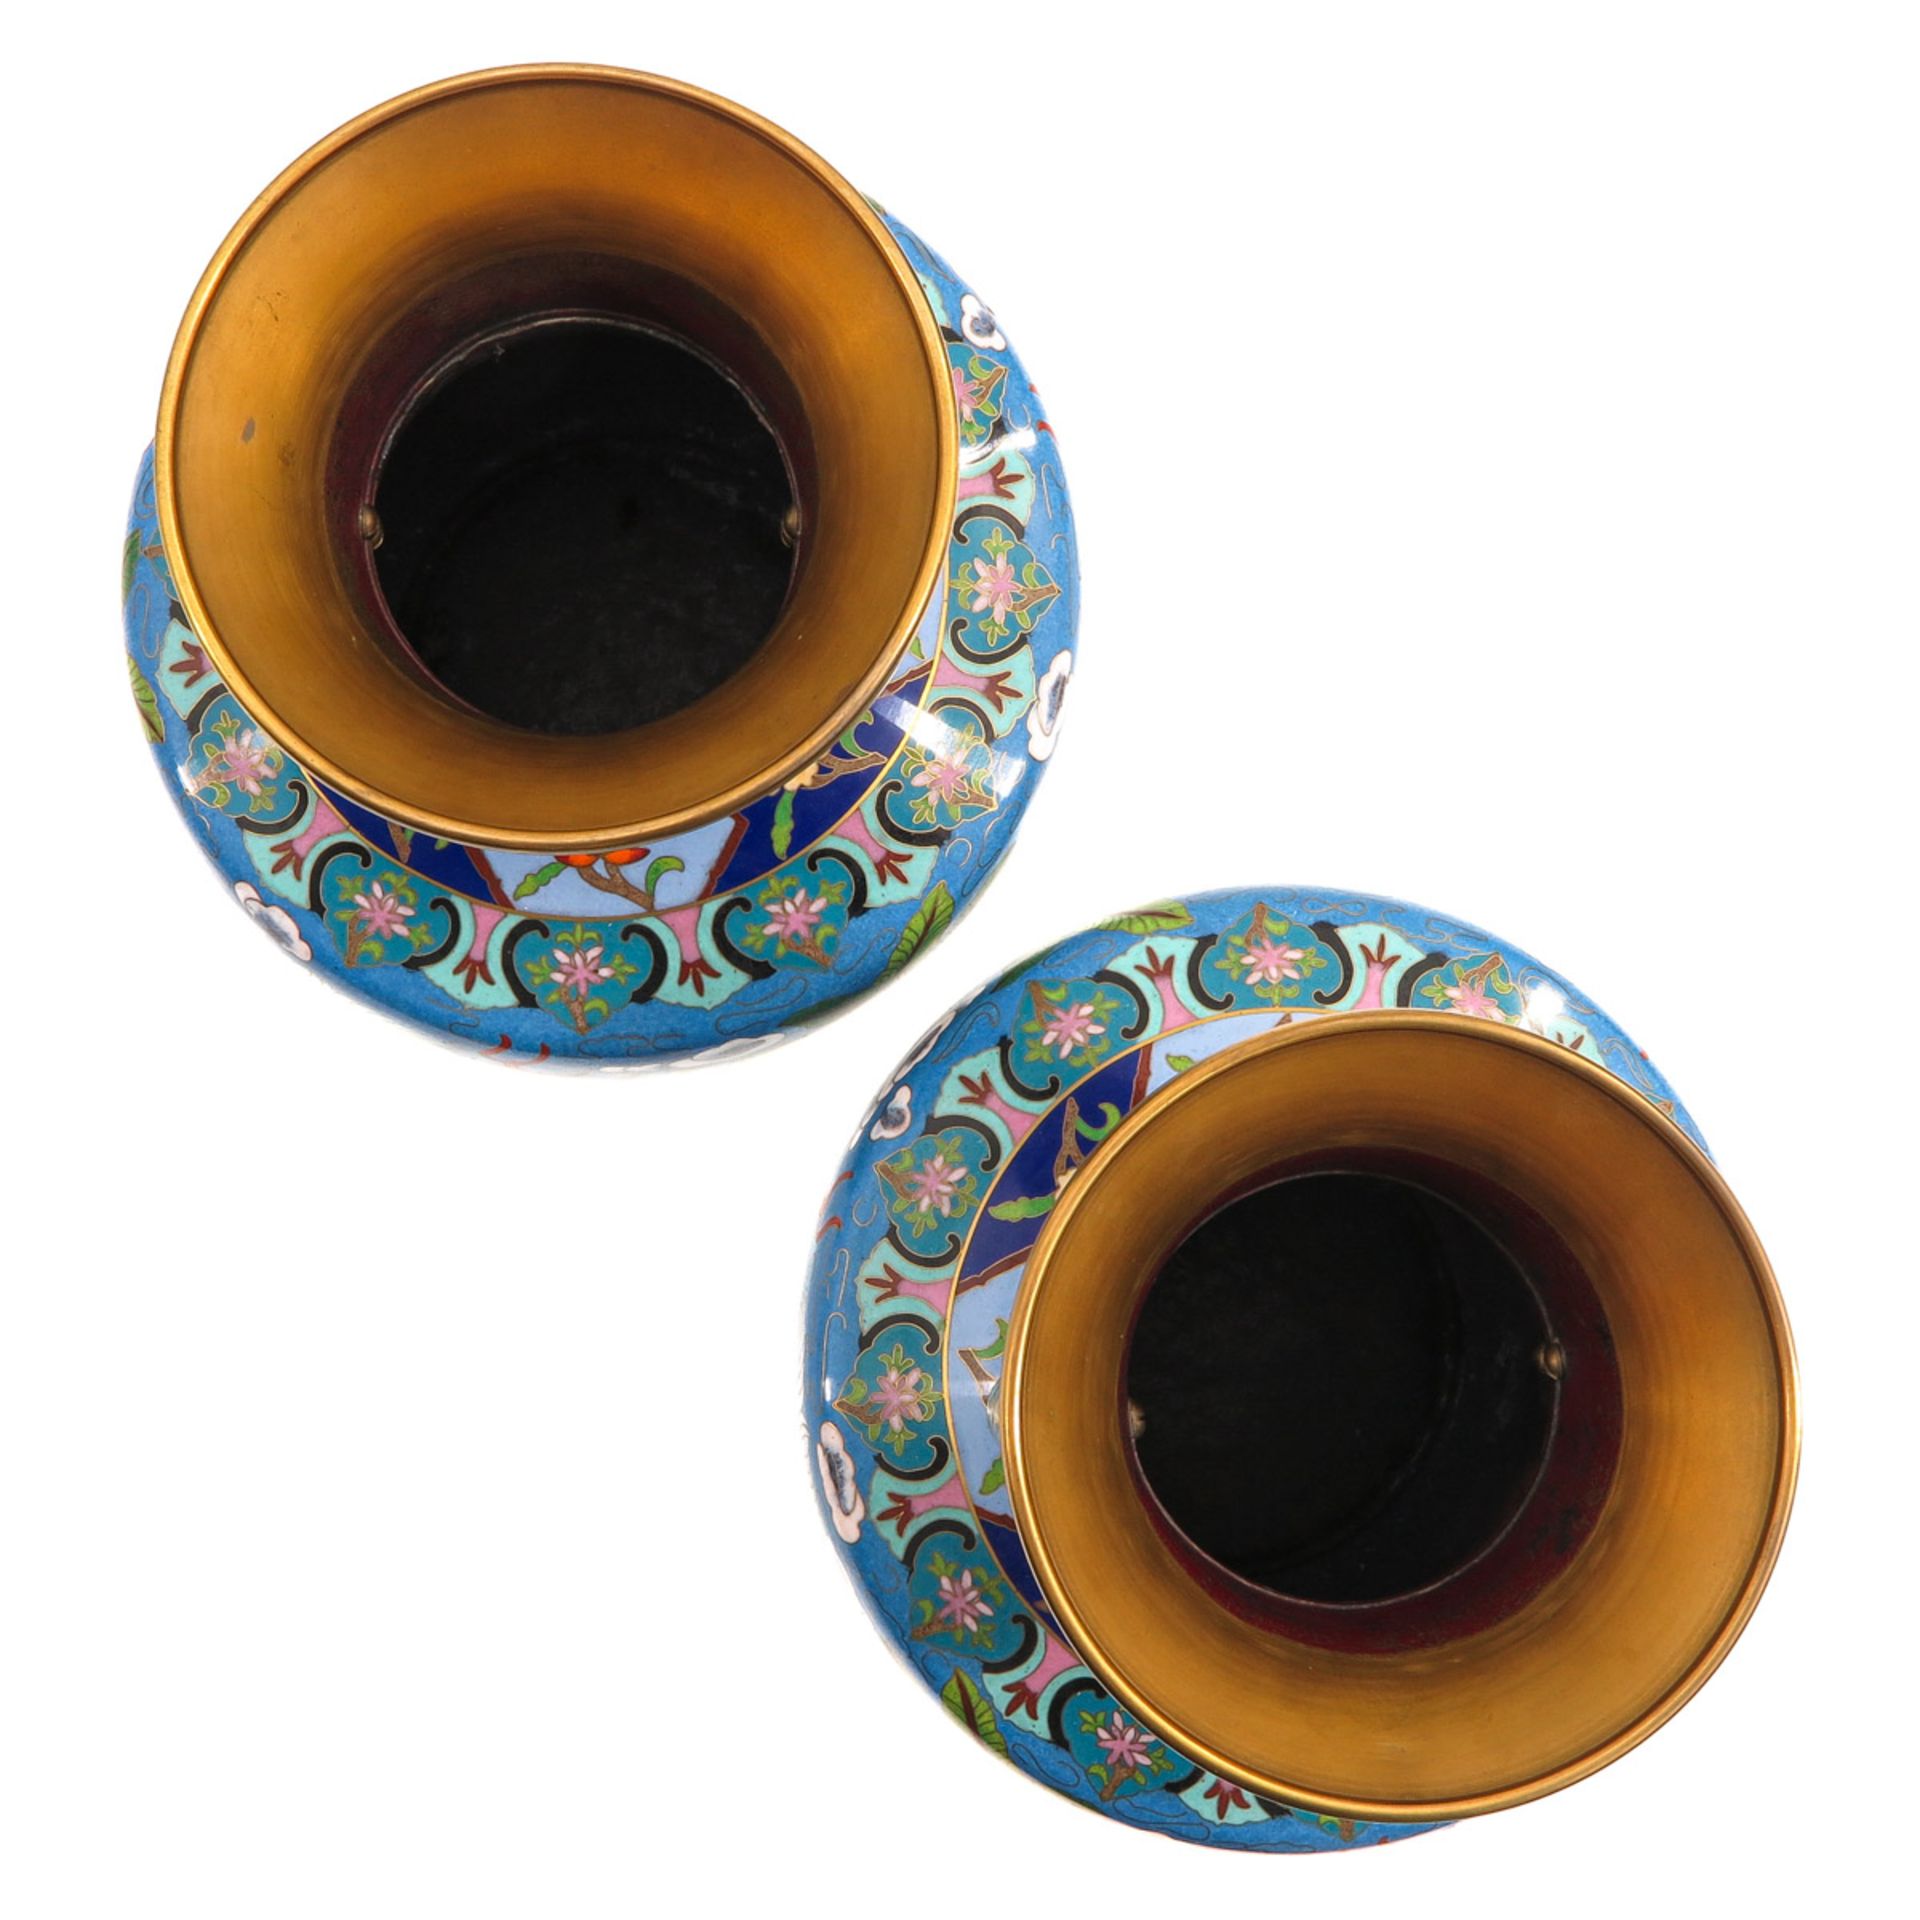 A Pair of Cloisonne Vases - Image 5 of 10